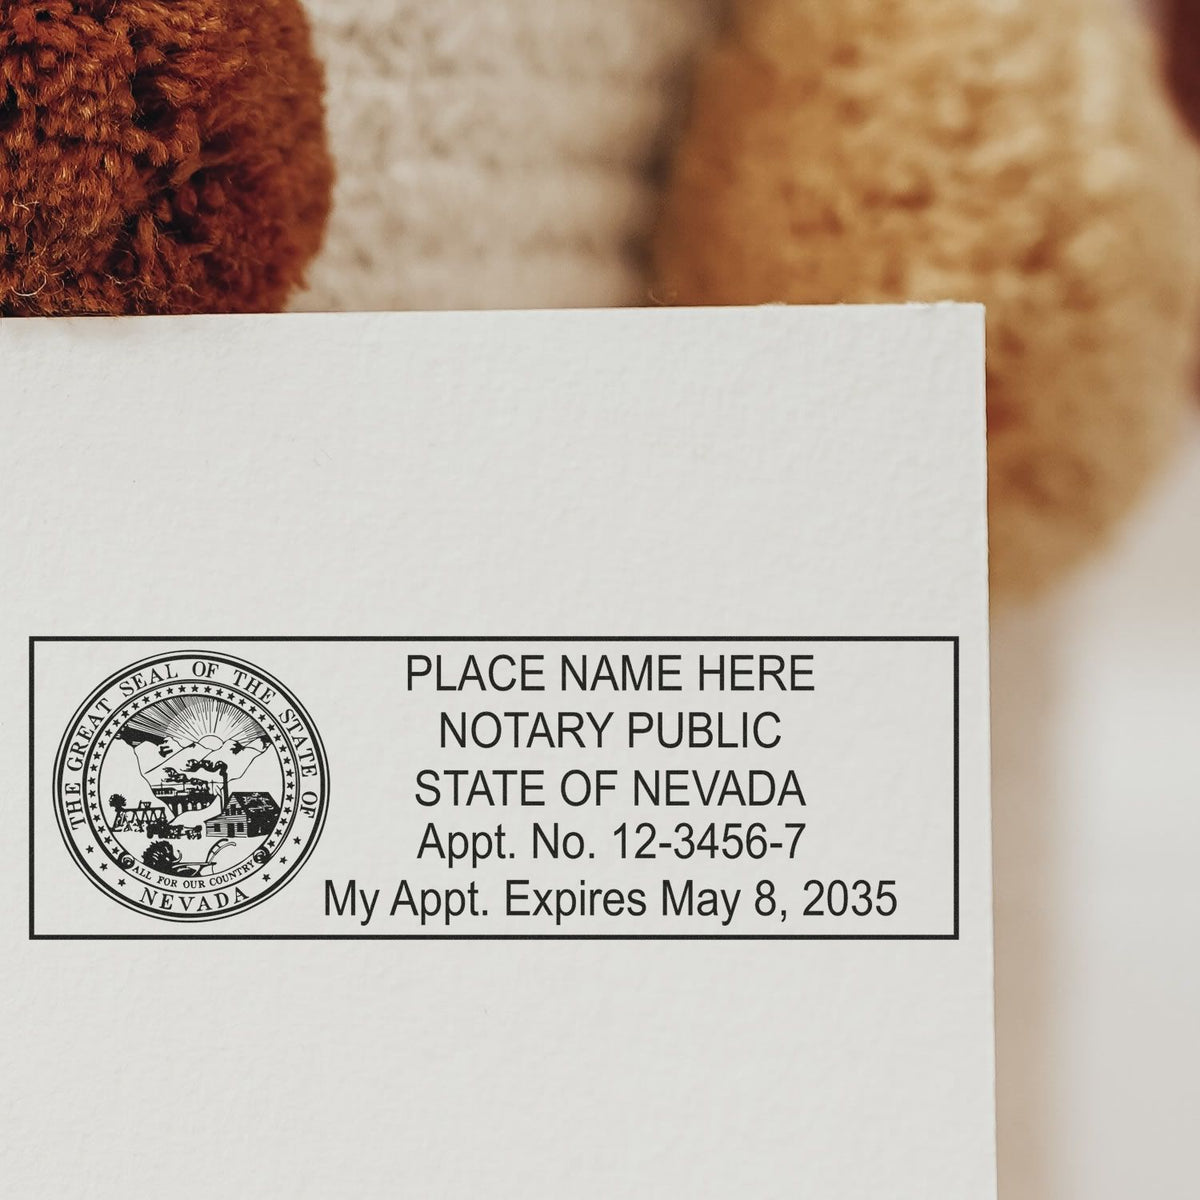 The Super Slim Nevada Notary Public Stamp stamp impression comes to life with a crisp, detailed photo on paper - showcasing true professional quality.